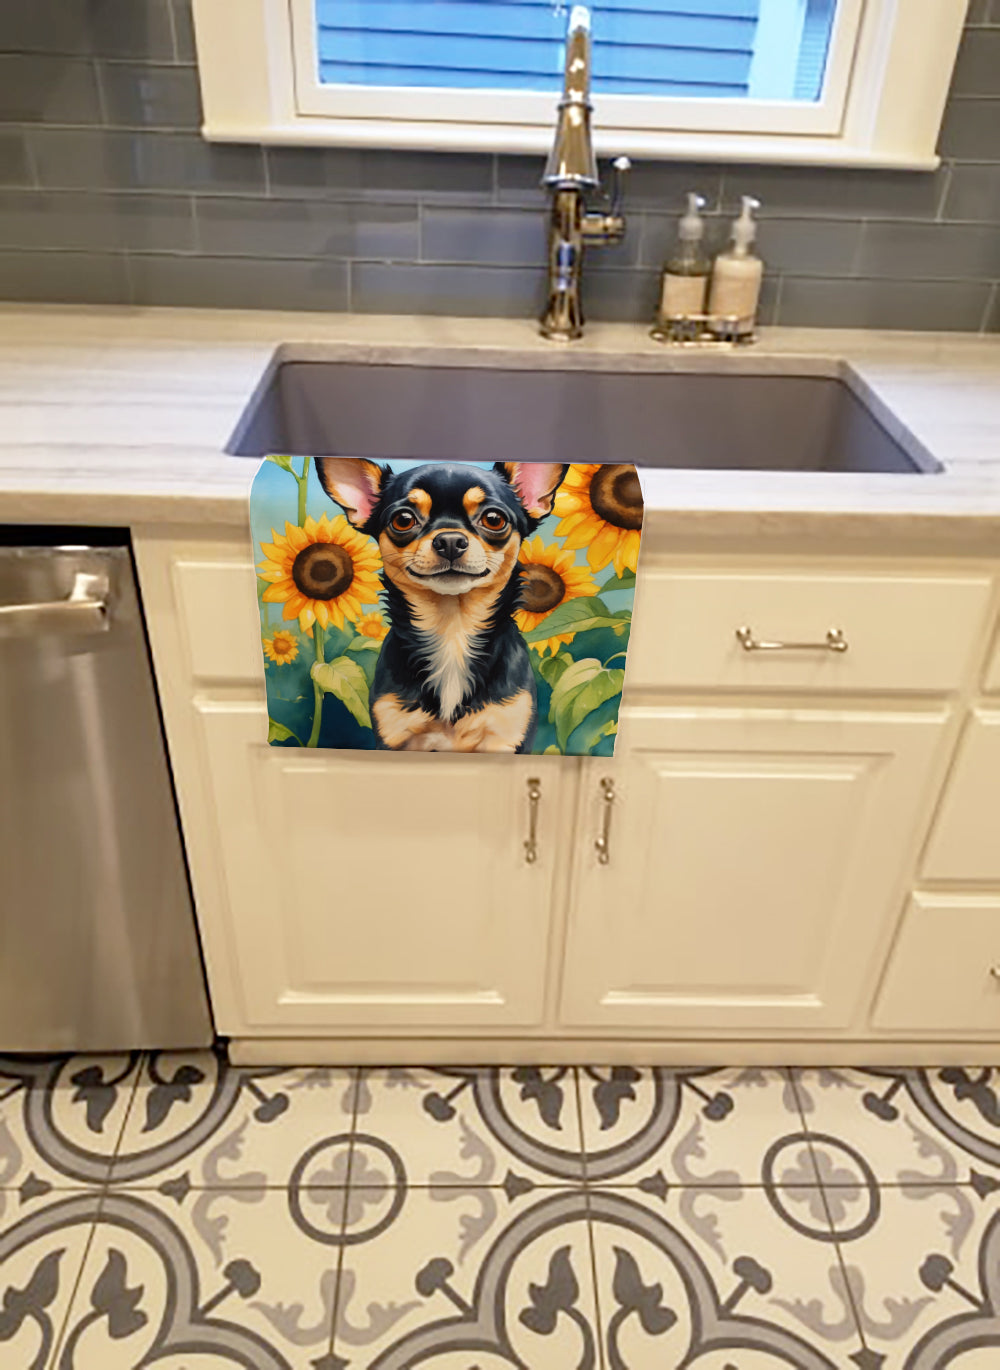 Buy this Chihuahua in Sunflowers Kitchen Towel